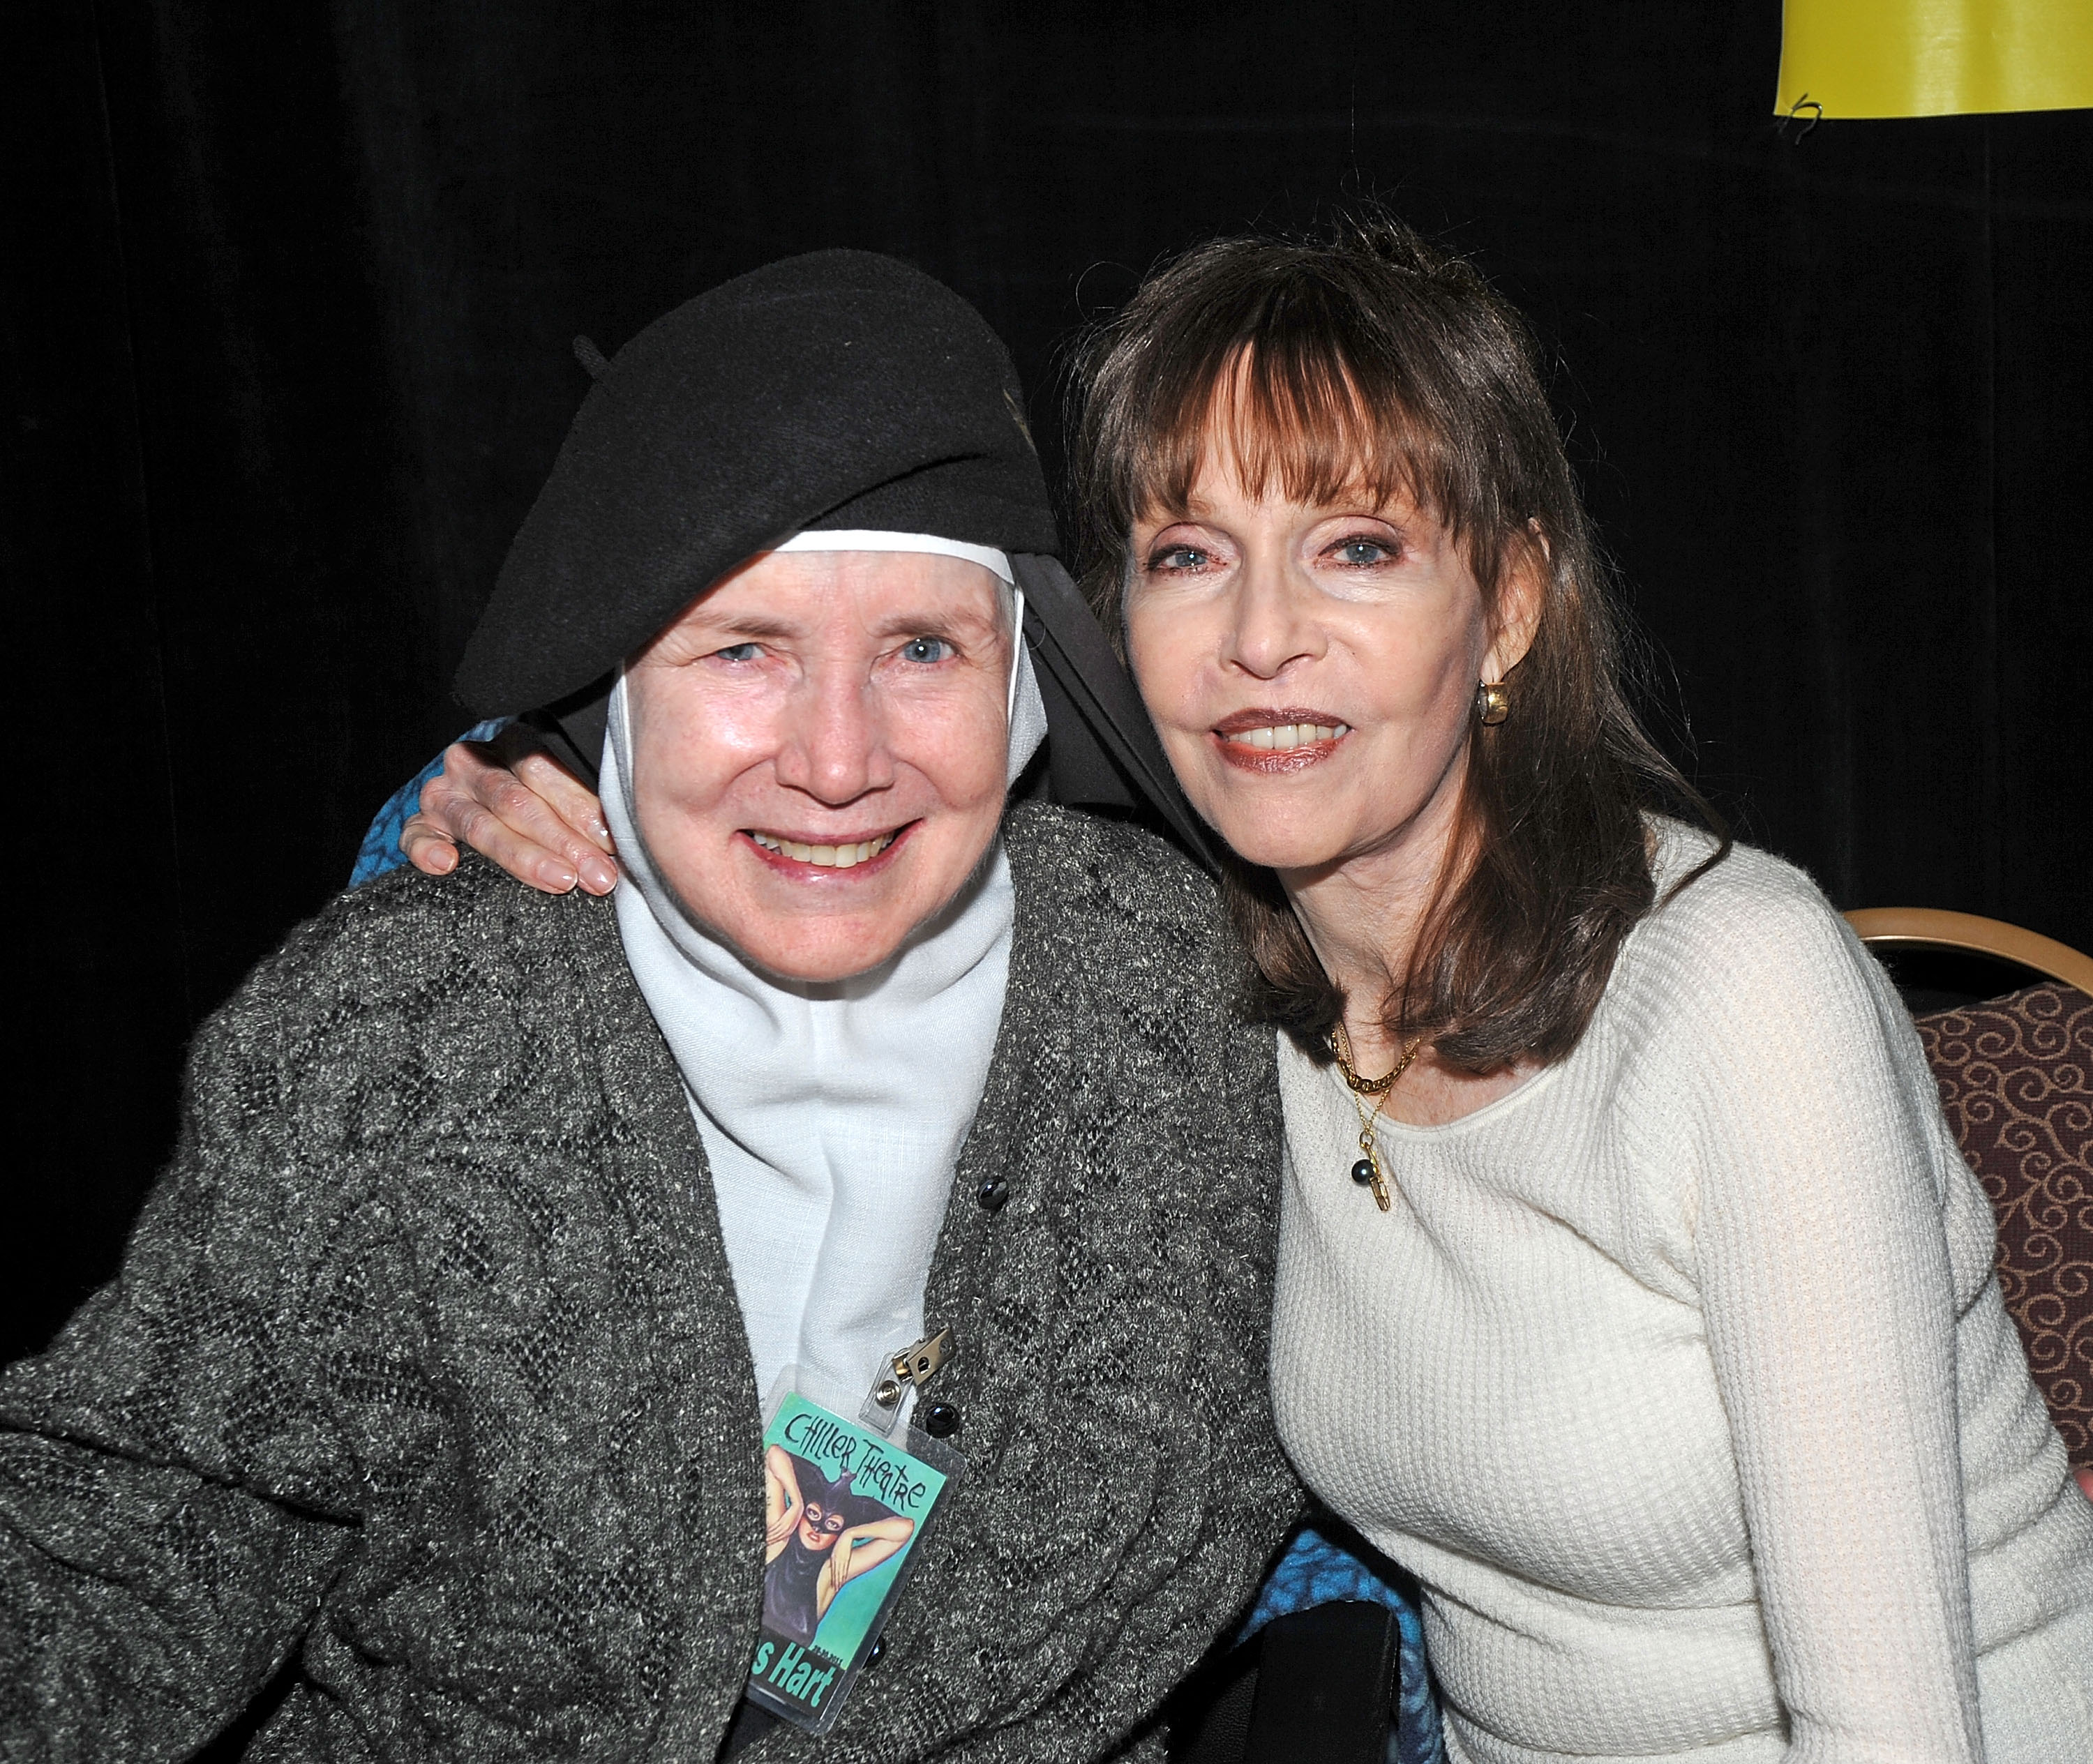 The actress and Barbara Feldon attend the Chiller Theatre Expo in Parsippany, New Jersey on October 29, 2011. | Source: Getty Images